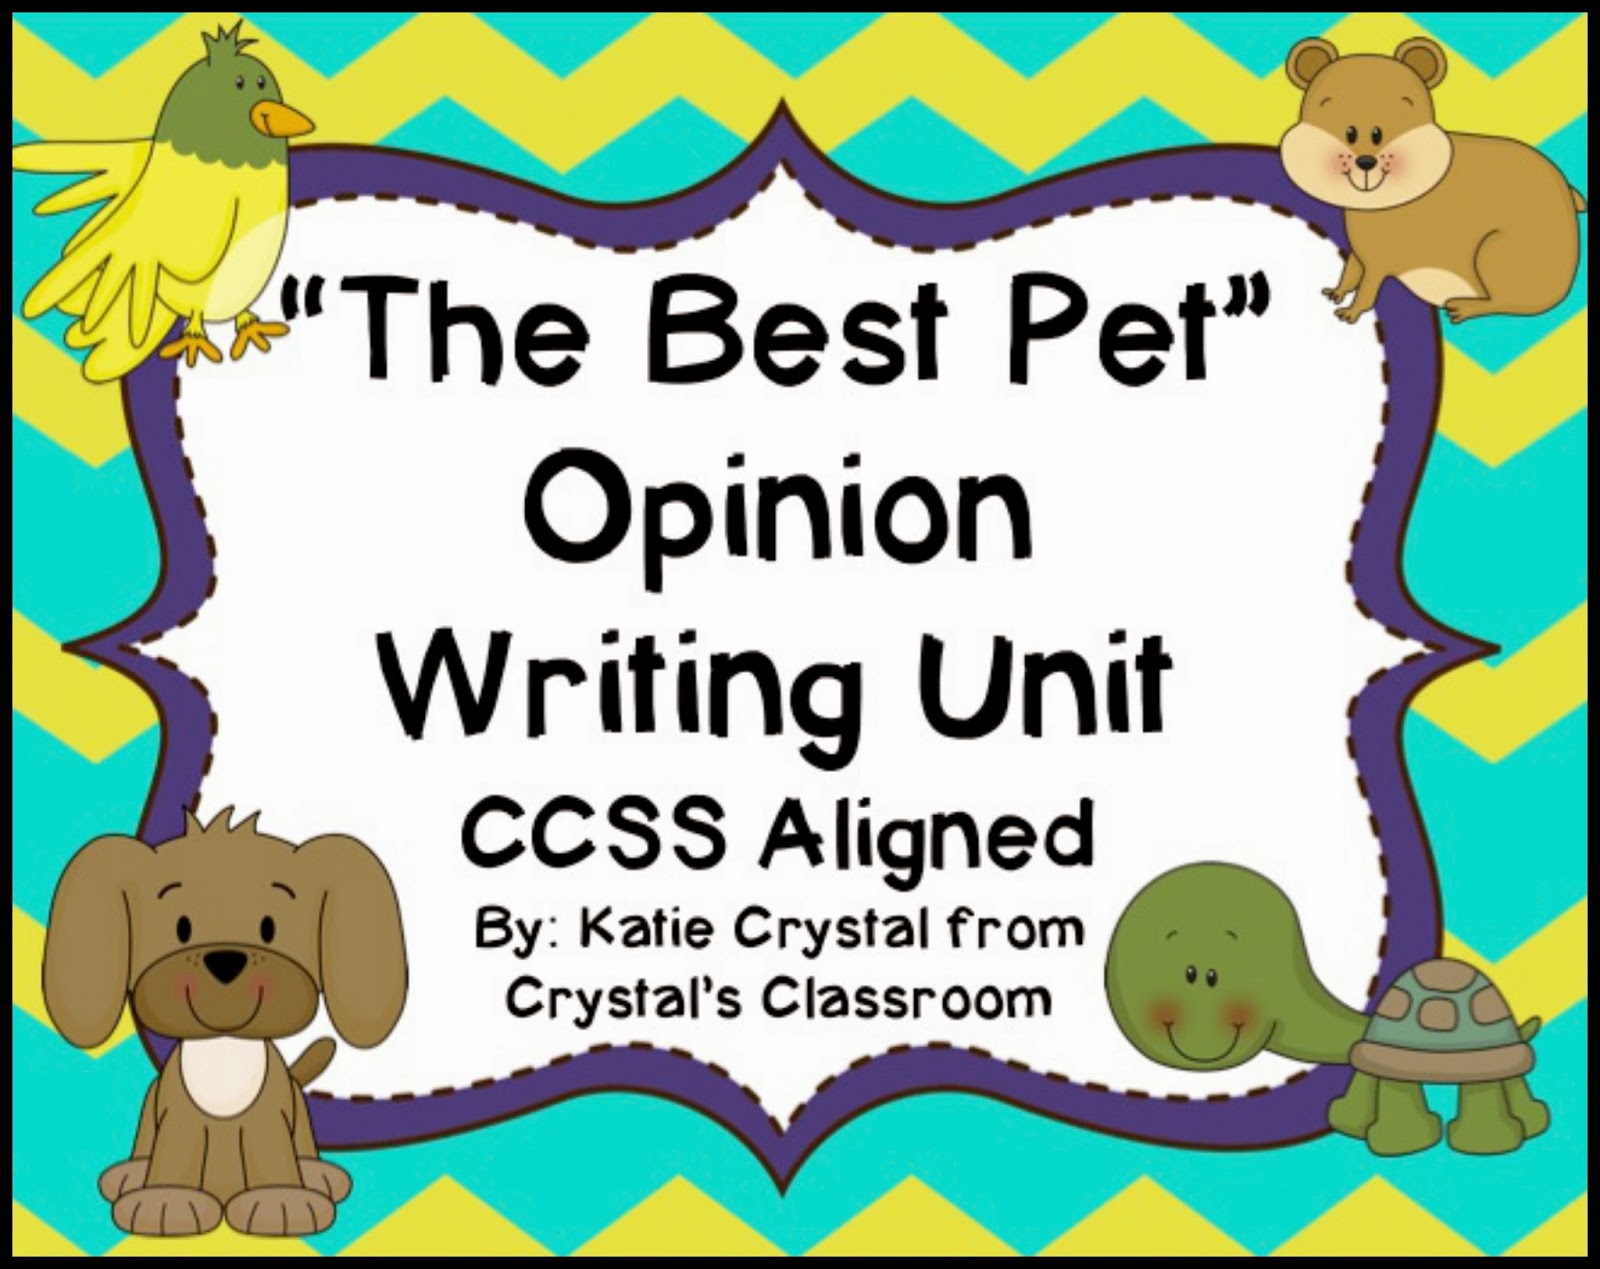 Pet writing. Many Classroom have Pets. This is the best. Pet writing 3